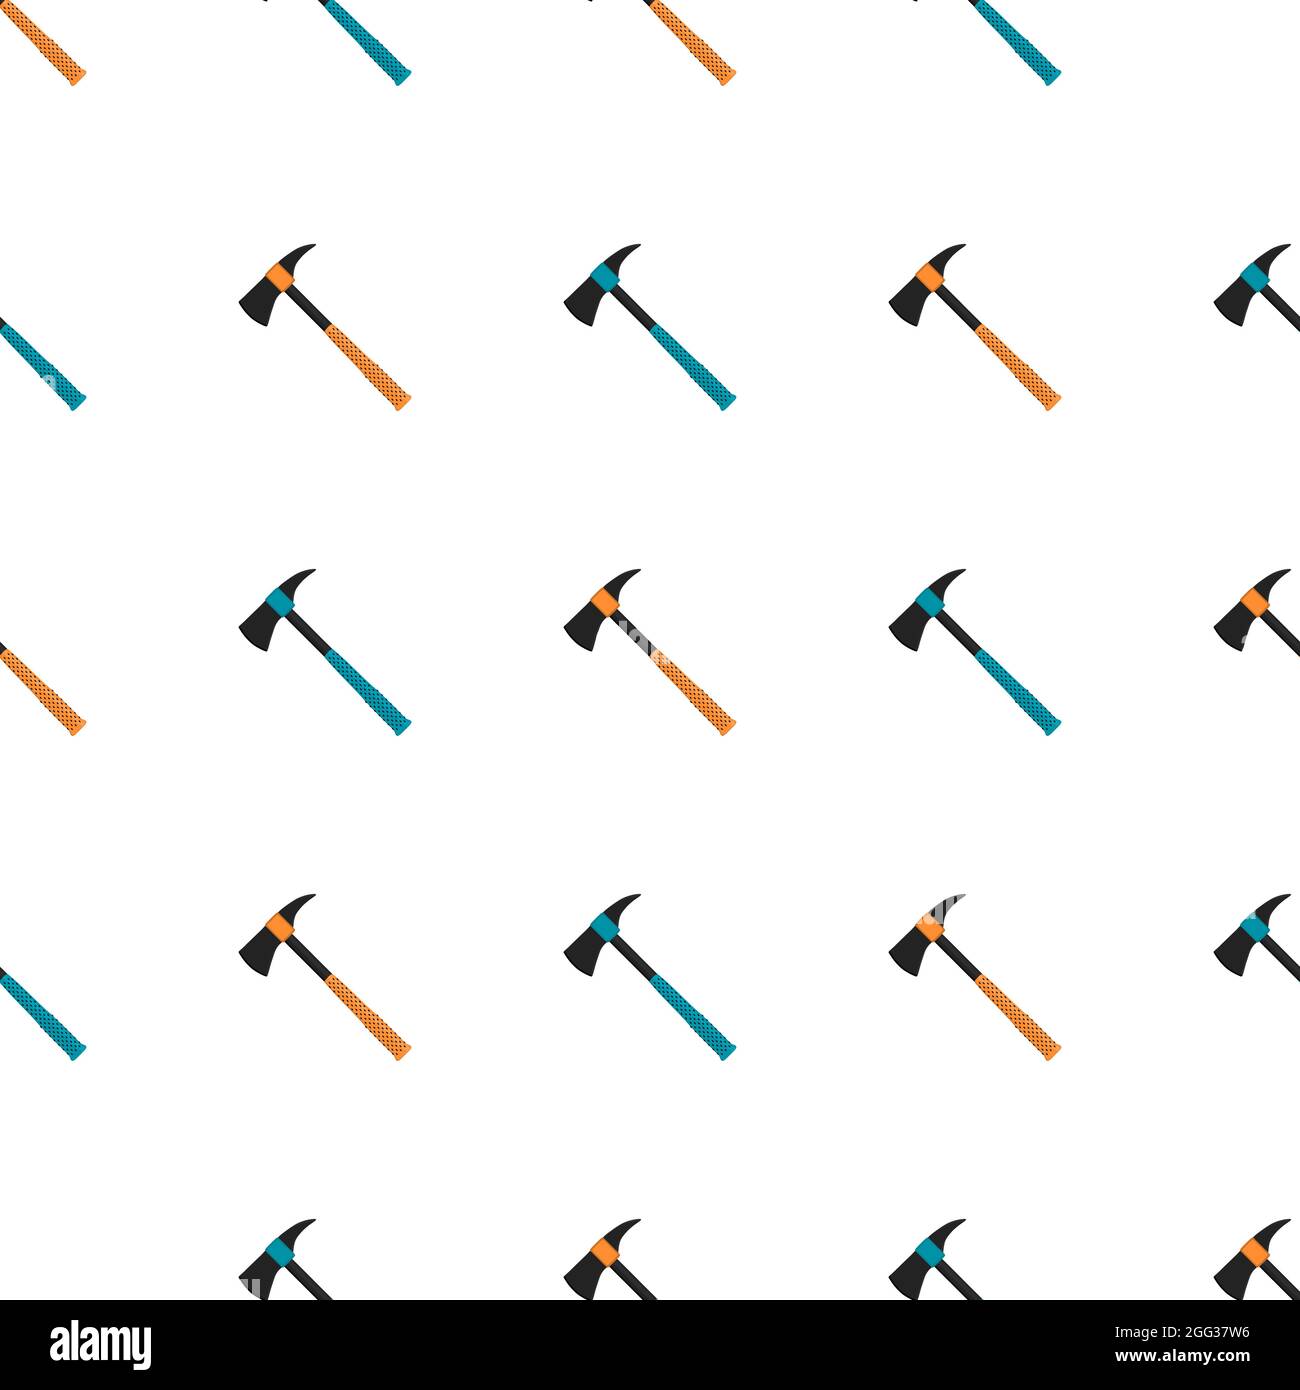 Illustration on theme pattern steel axes with wooden handle, metal ax for hunting. Big kit ax consisting of many identical axes on white background. F Stock Vector